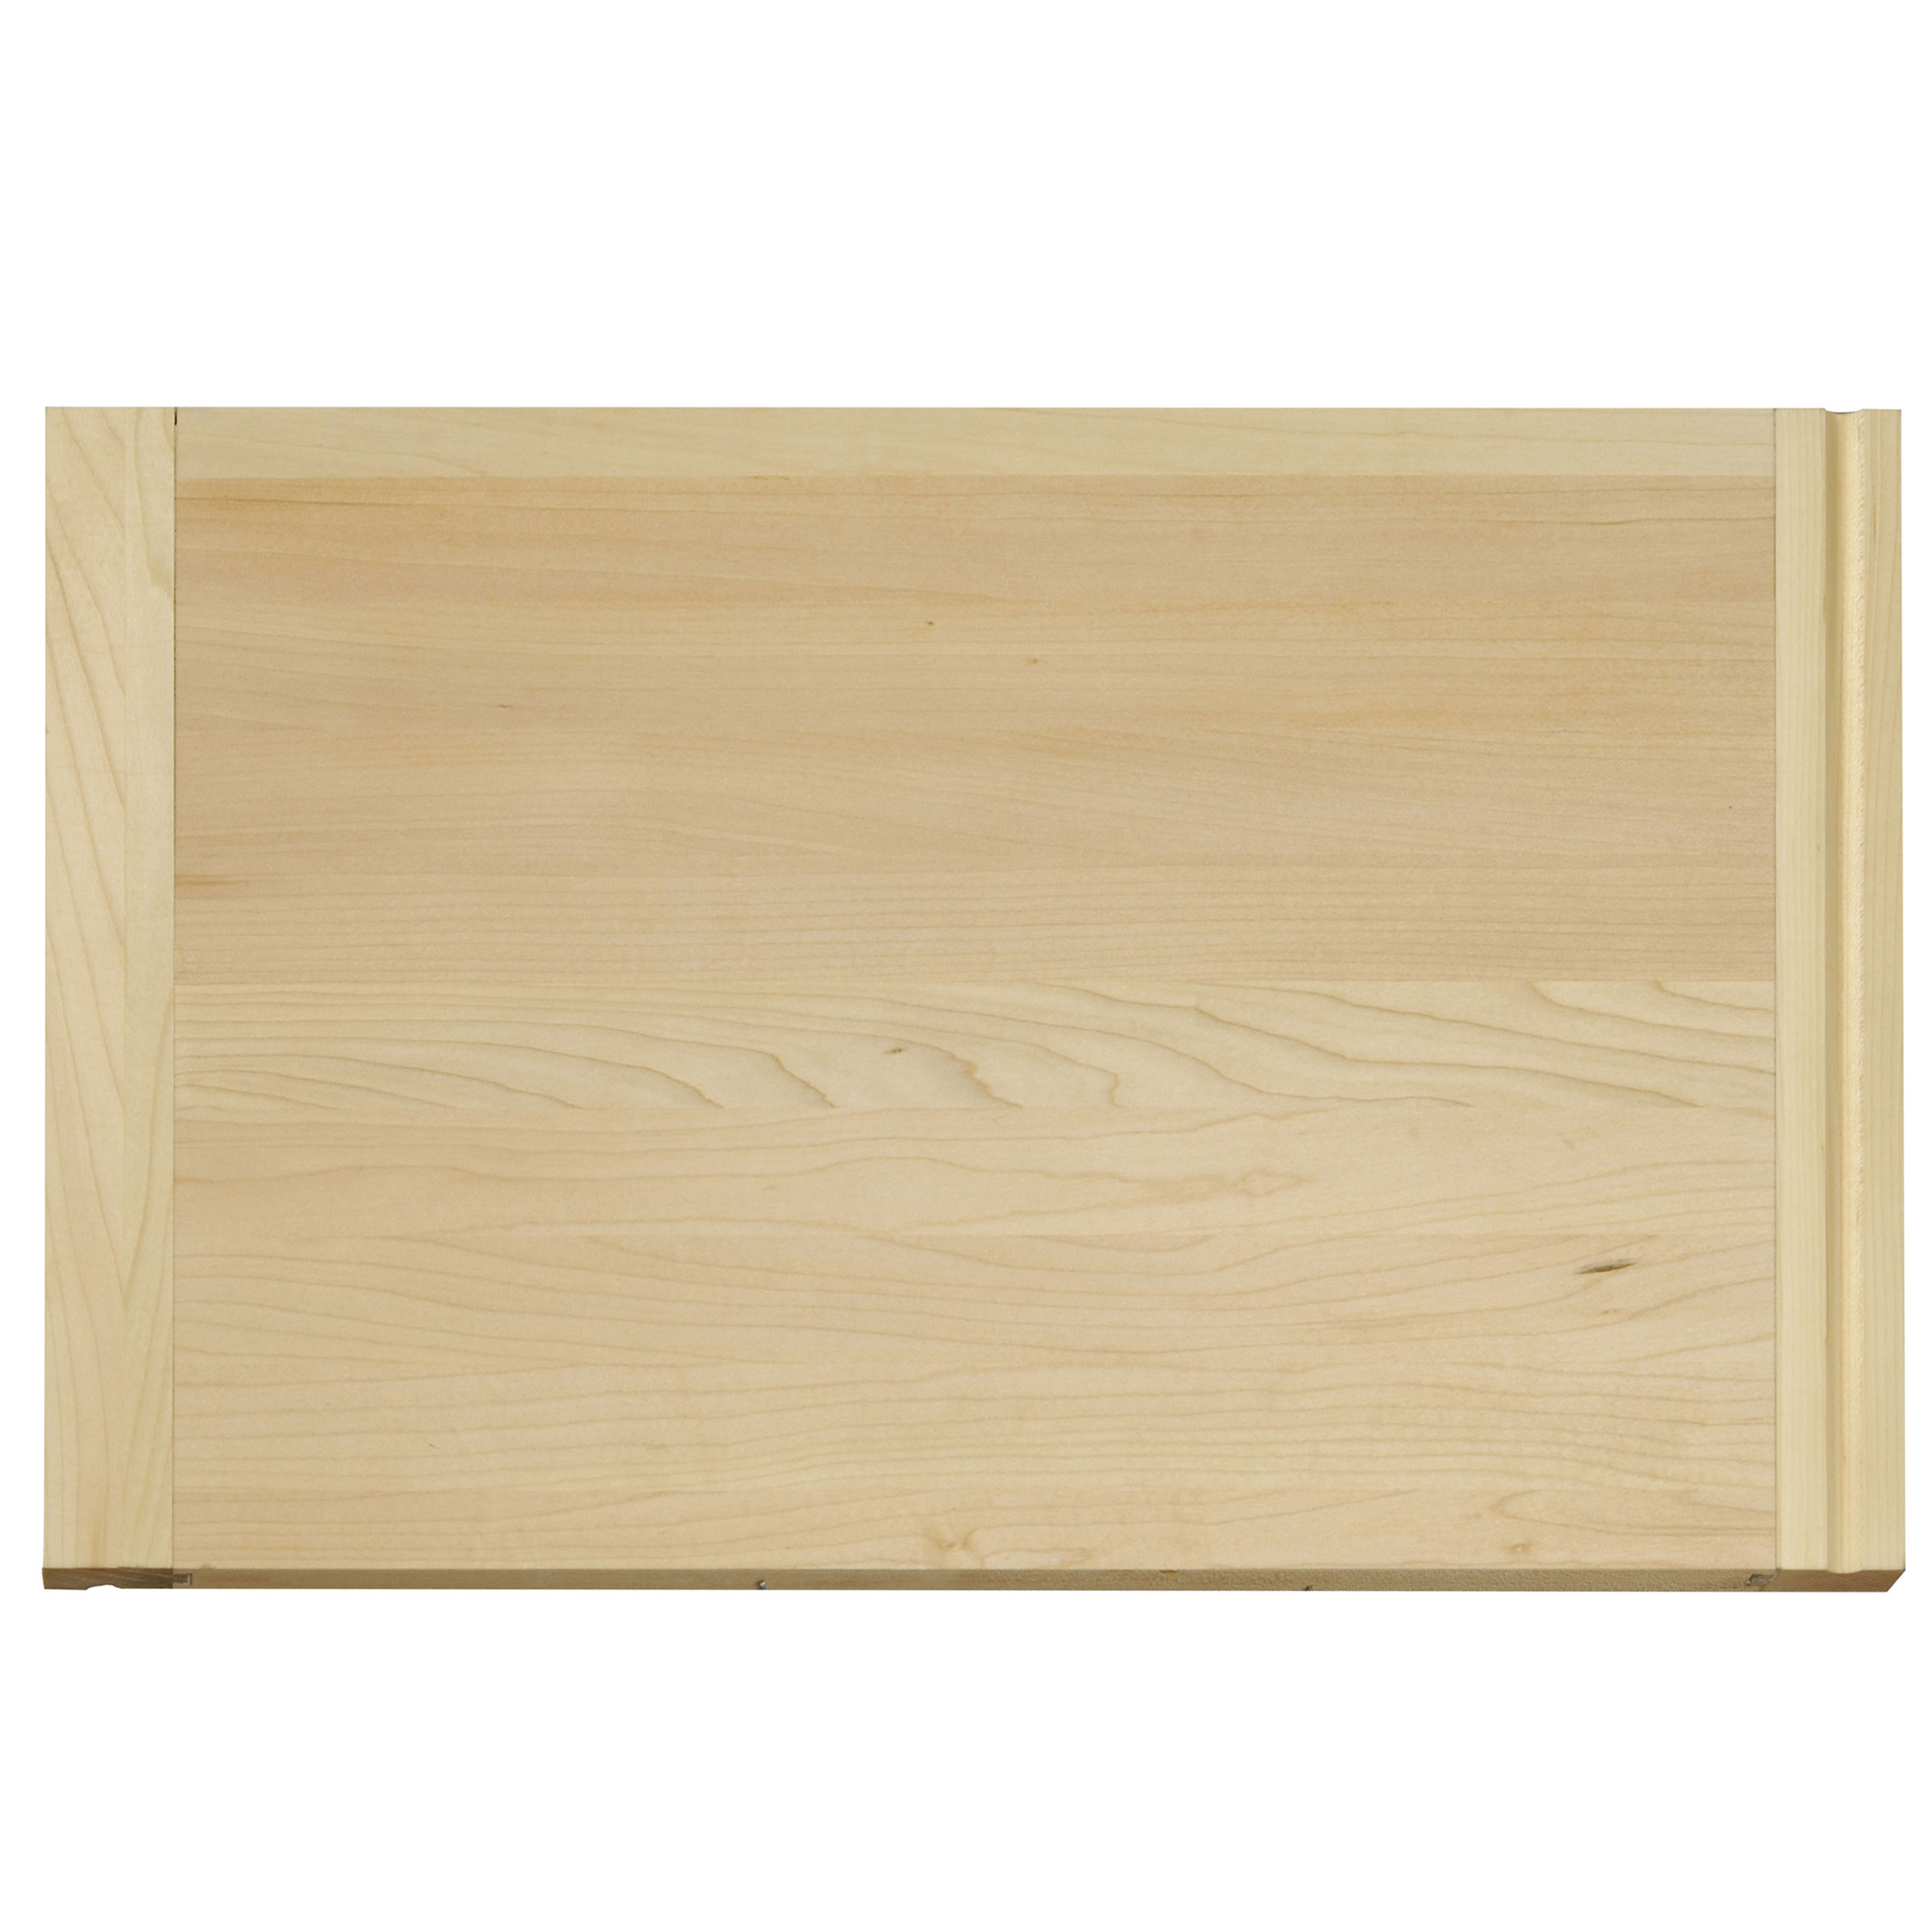 14 X 22 Inch X 3/4 Inch Thick Hardwood Cutting Board With Routed Pull-out